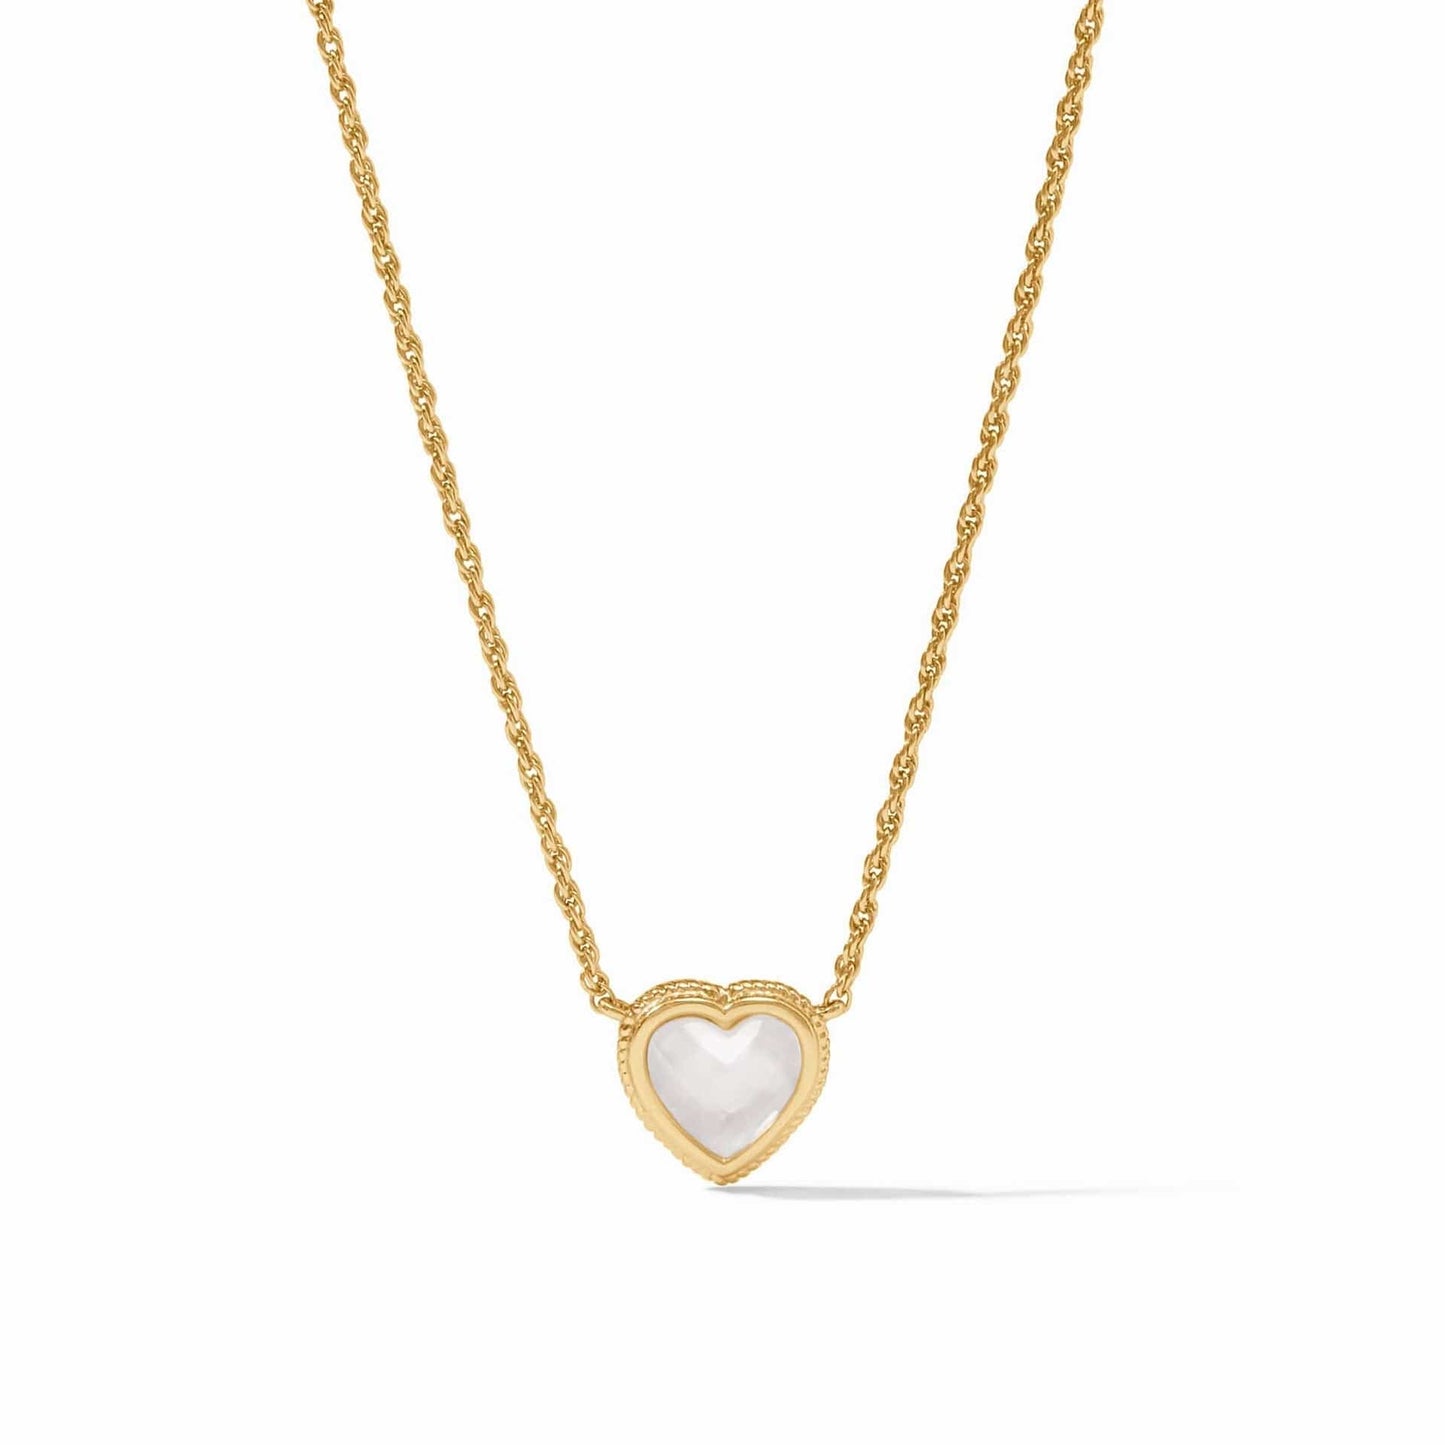 NKL-GPL Heart Delicate Necklace Iridescent Clear Crystal